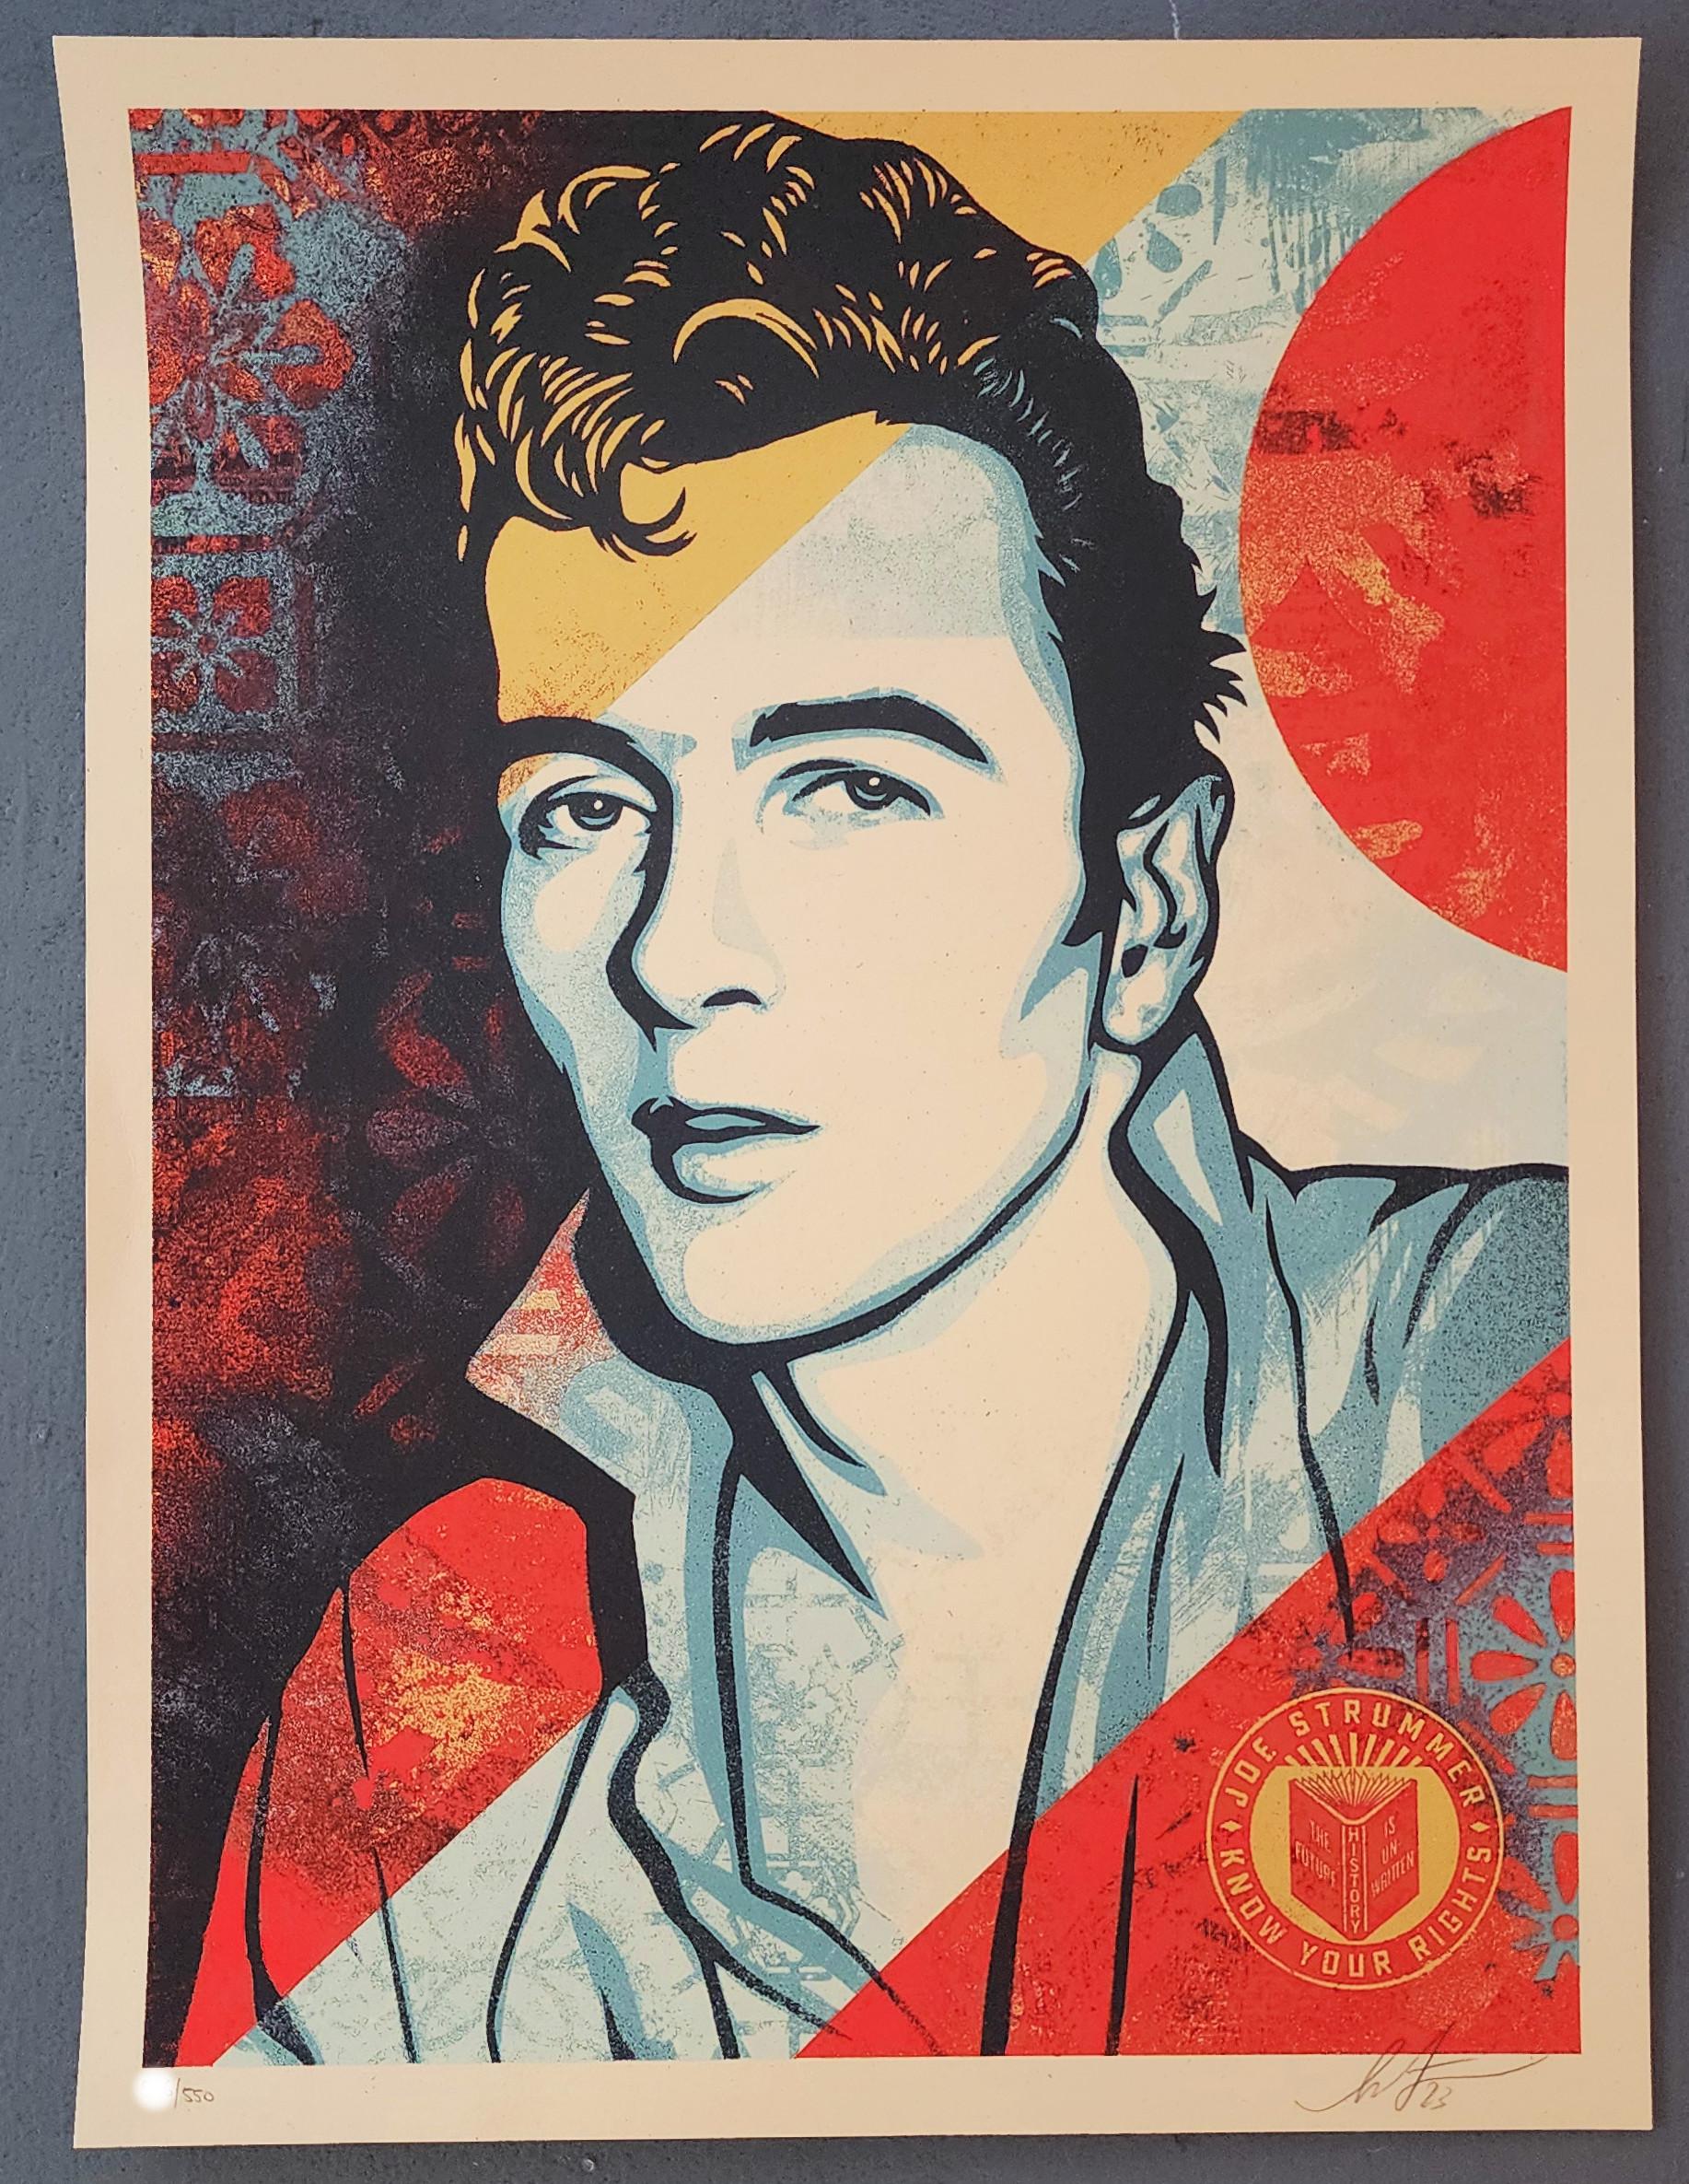 Shepard Fairey
Joe Strummer – Know Your Rights
Screen print on thick cream Speckletone paper
Year: 2023
Size: 24x18 inches
Edition: 550
Signed, dated and numbered by hand
COA provided
Ref.: 924802-2059

Tags: The Clash, Philosophical, Icon, The